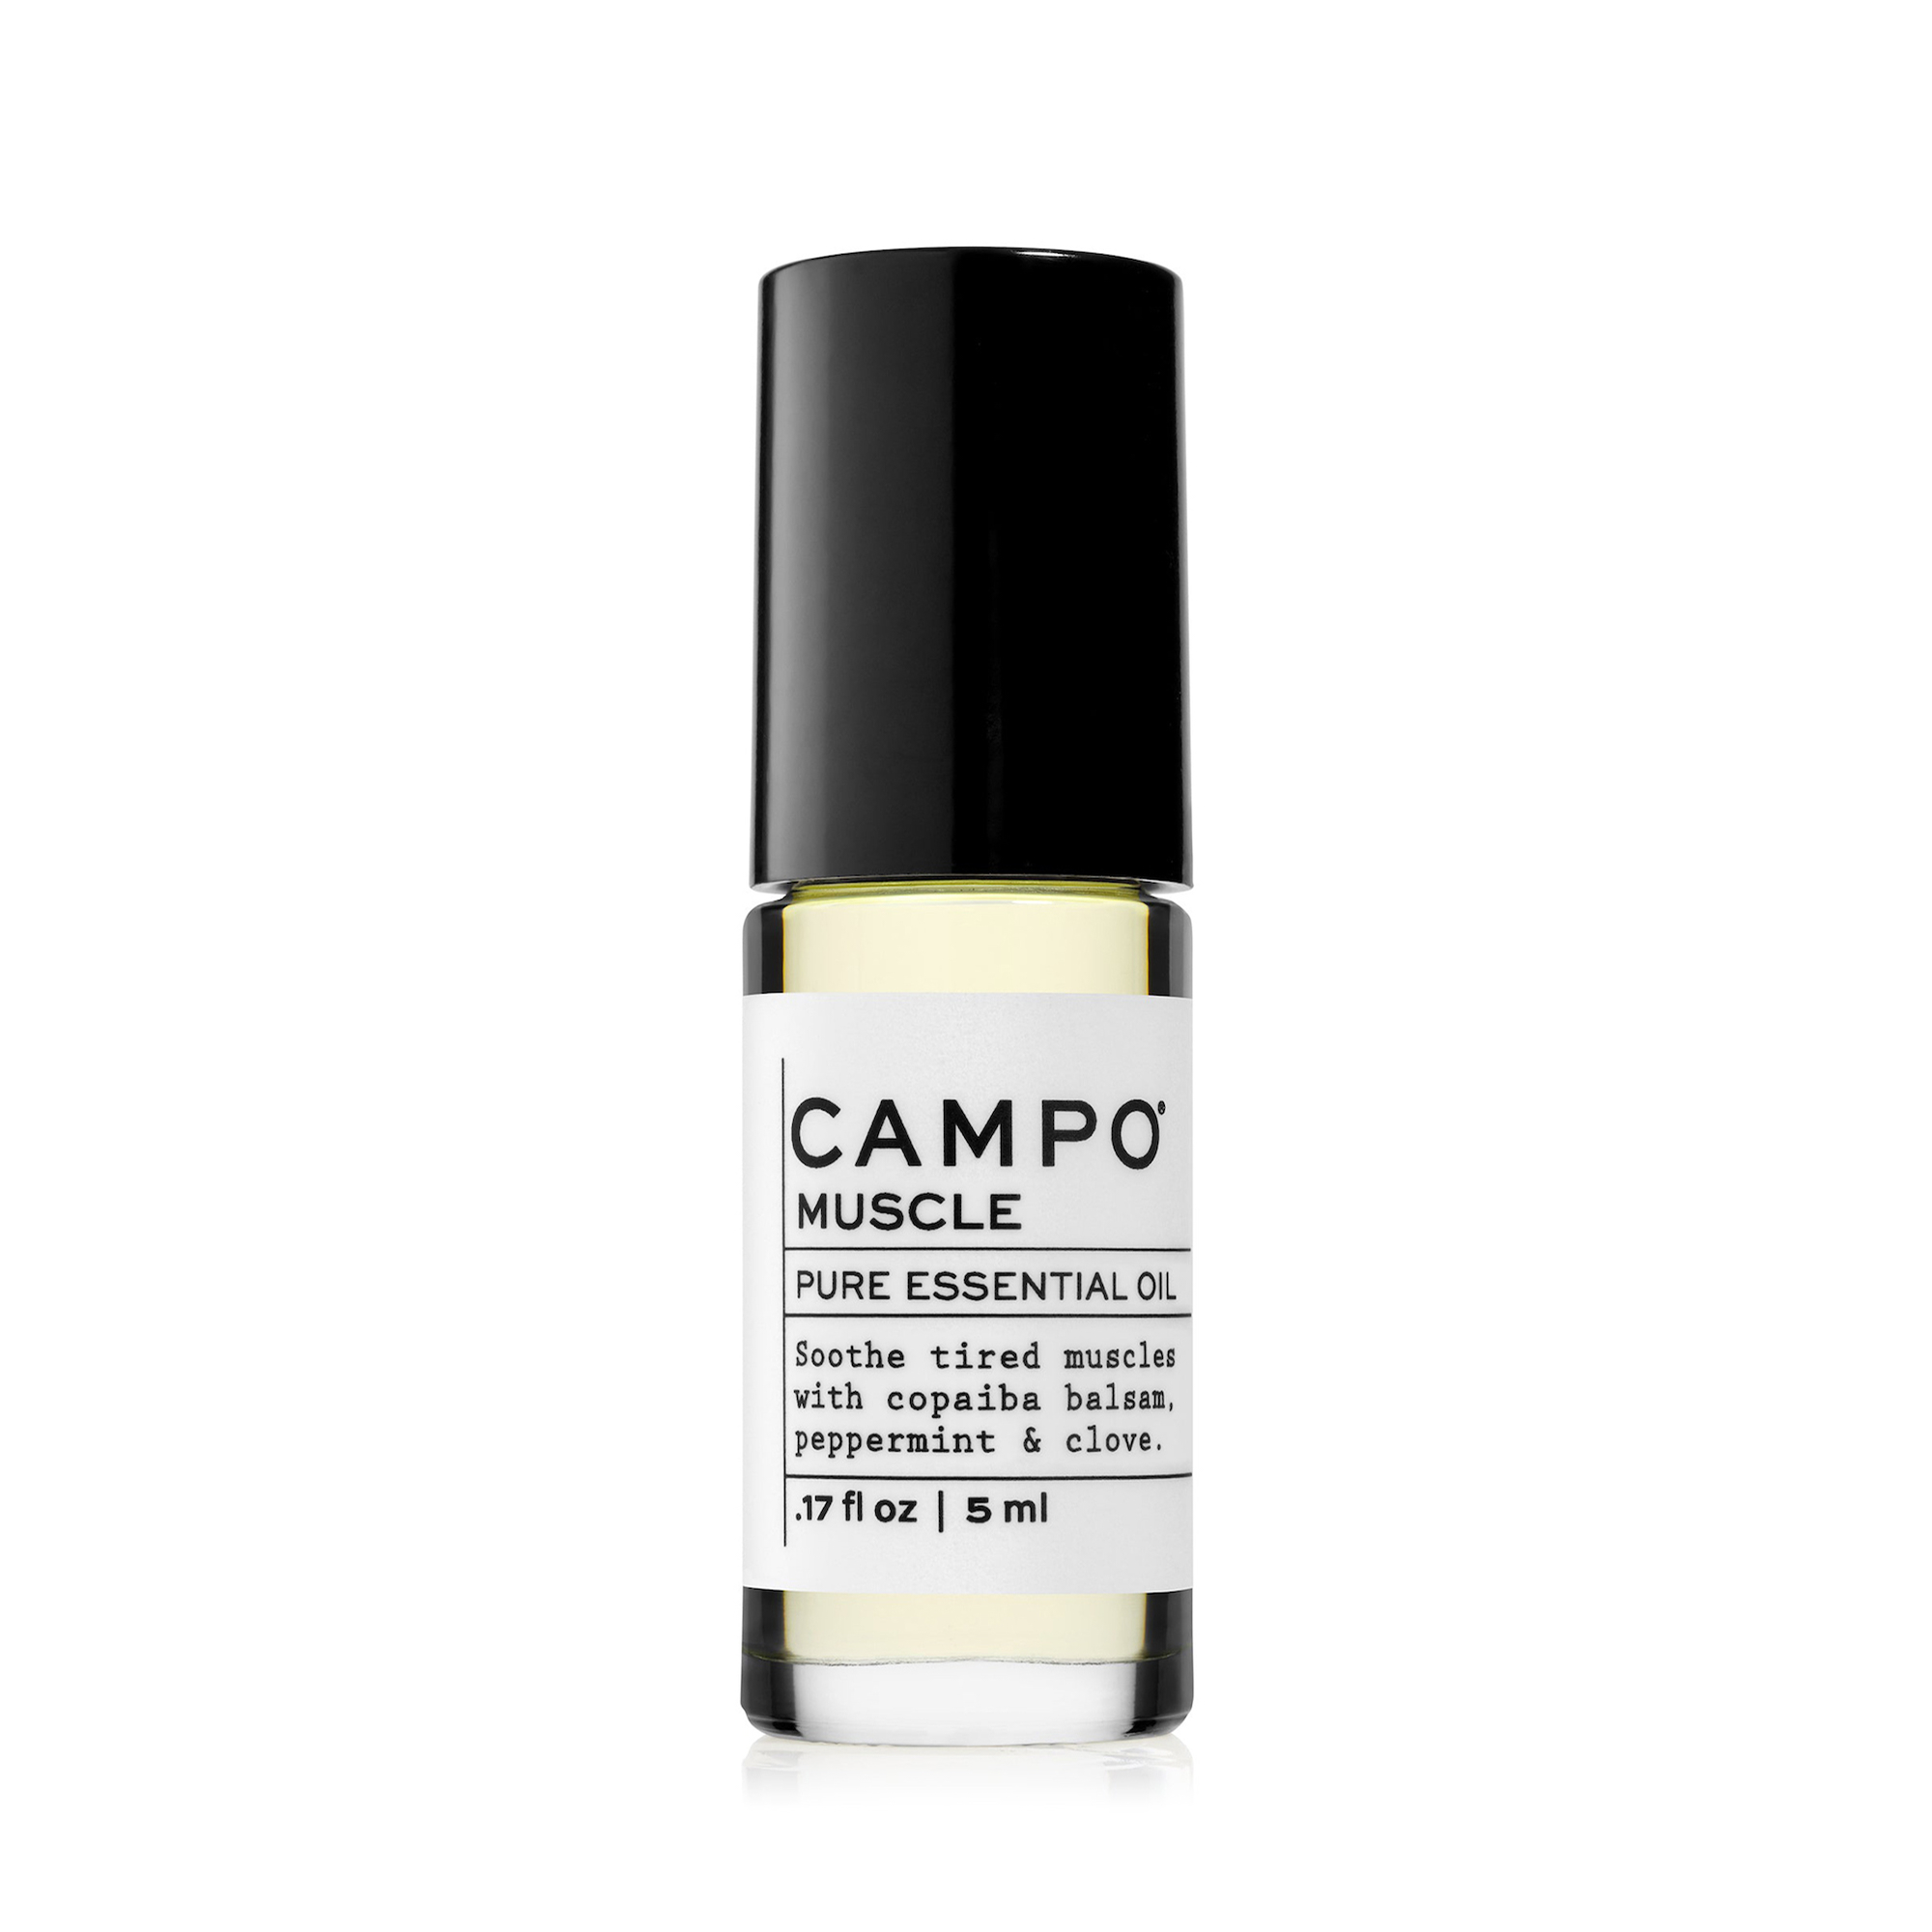 A harmonious blend of soothing essential oils, designed to ease muscle tension and provide a sense of relief and relaxation. Packed in 5 ml, portable roll-on bottle.